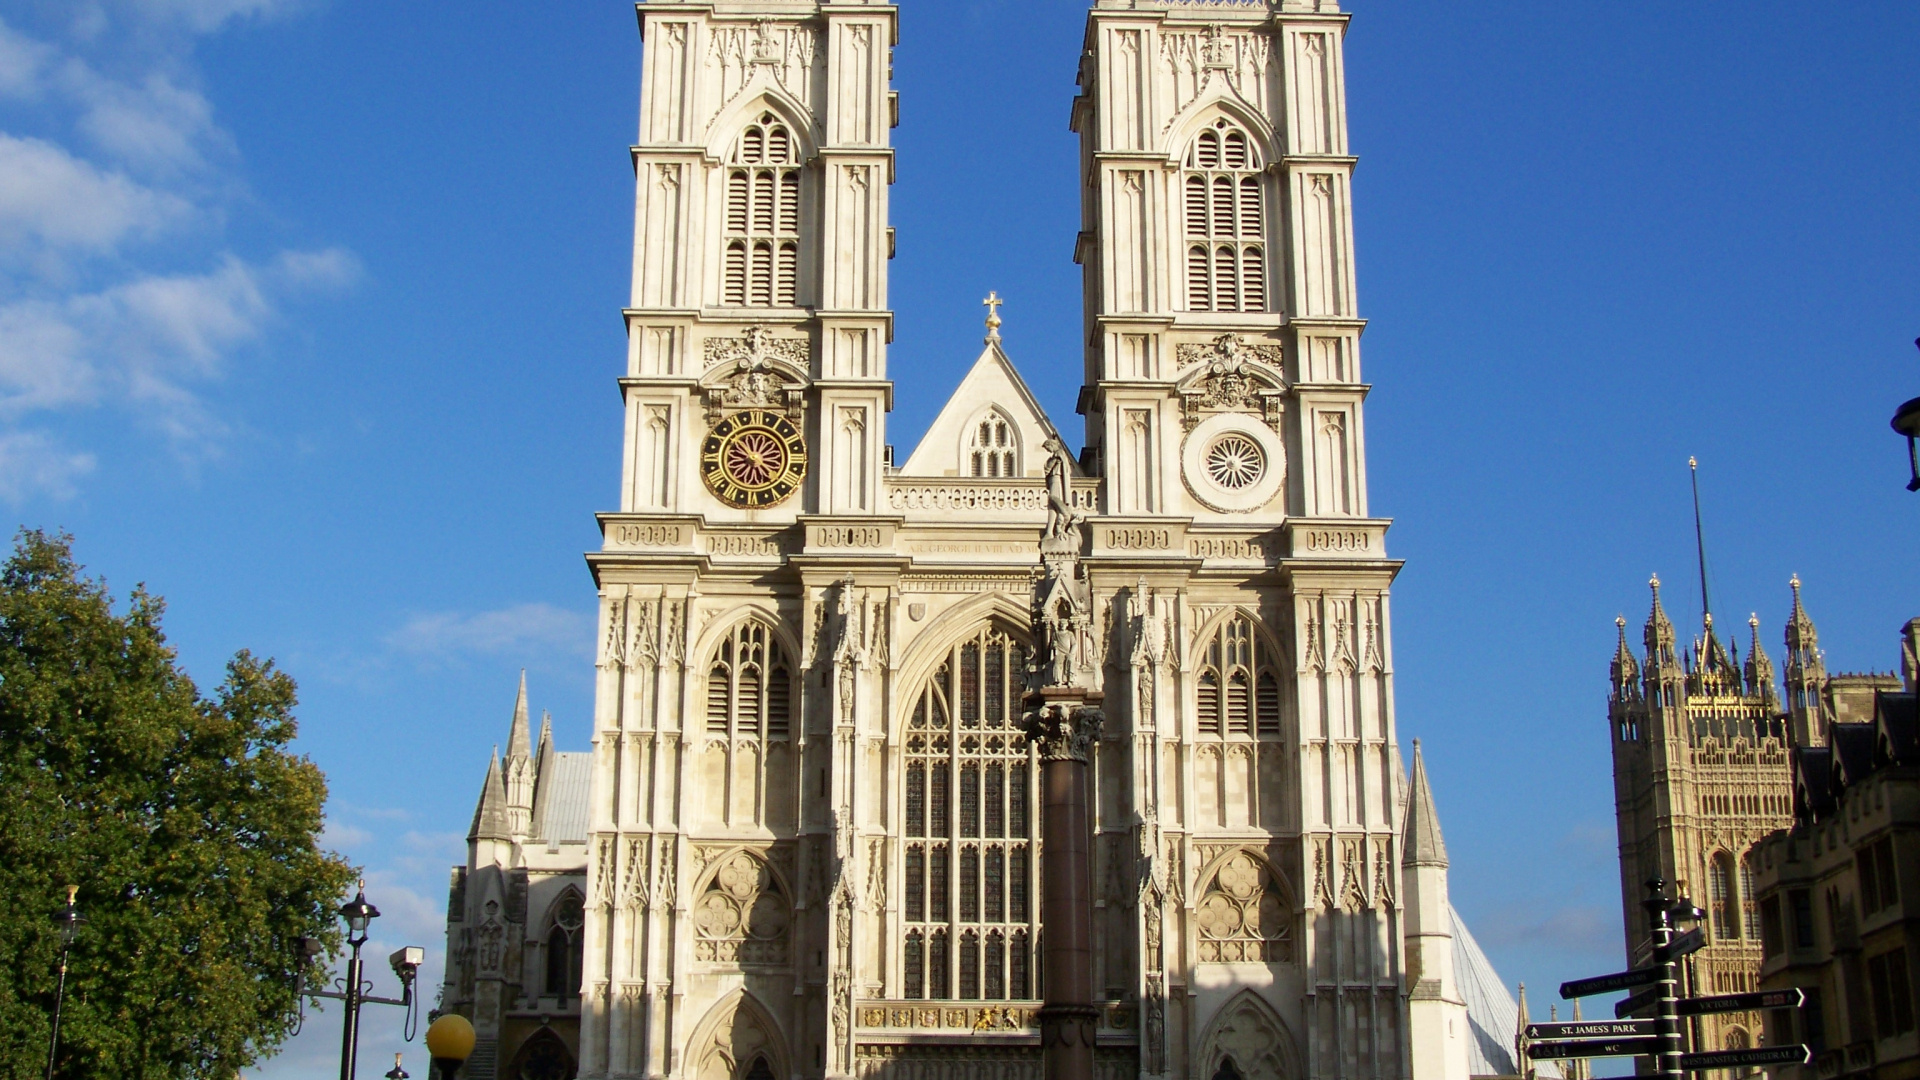 Westminster Abbey, HD wallpapers, High resolution, Image gallery, 1920x1080 Full HD Desktop